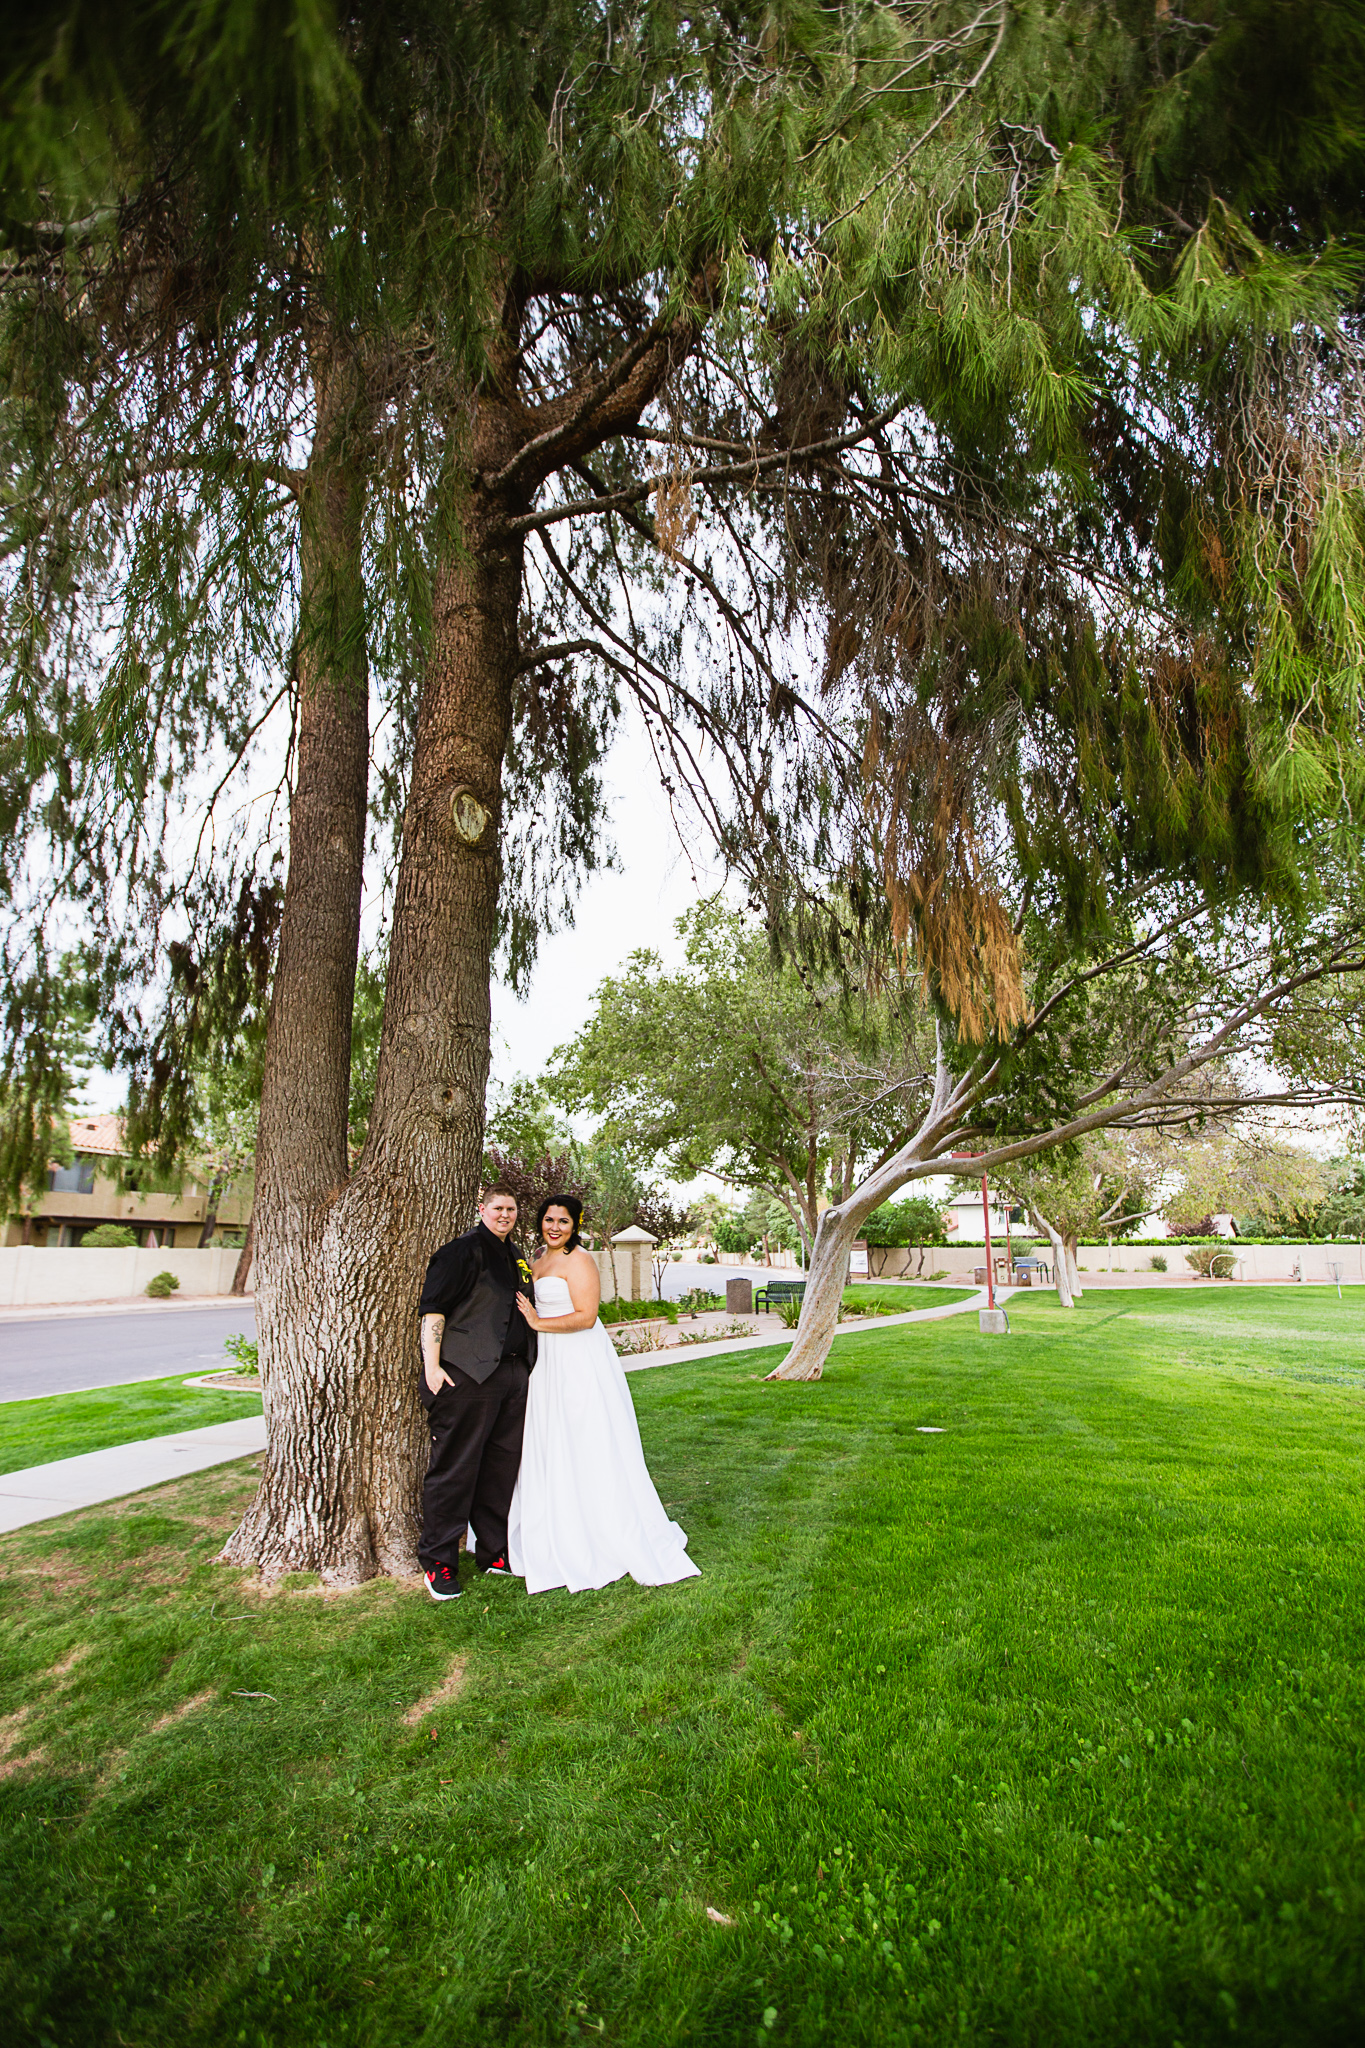 Brides leaning against a tree on their wedding day by LGBT friendly wedding photographer PMA Photography.